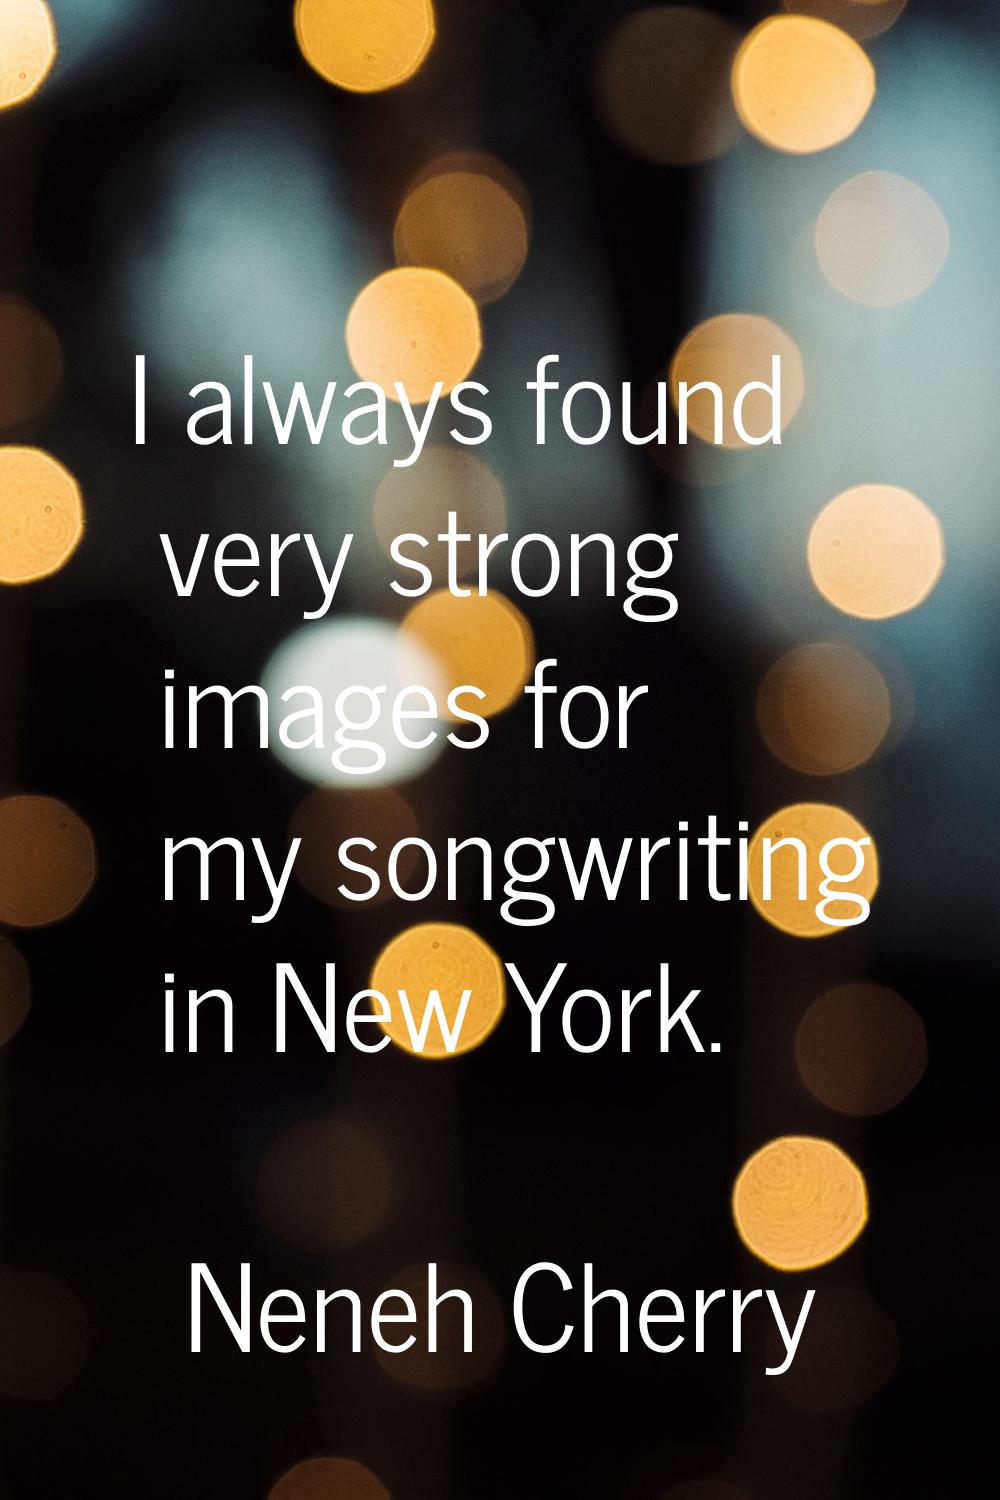 I always found very strong images for my songwriting in New York.